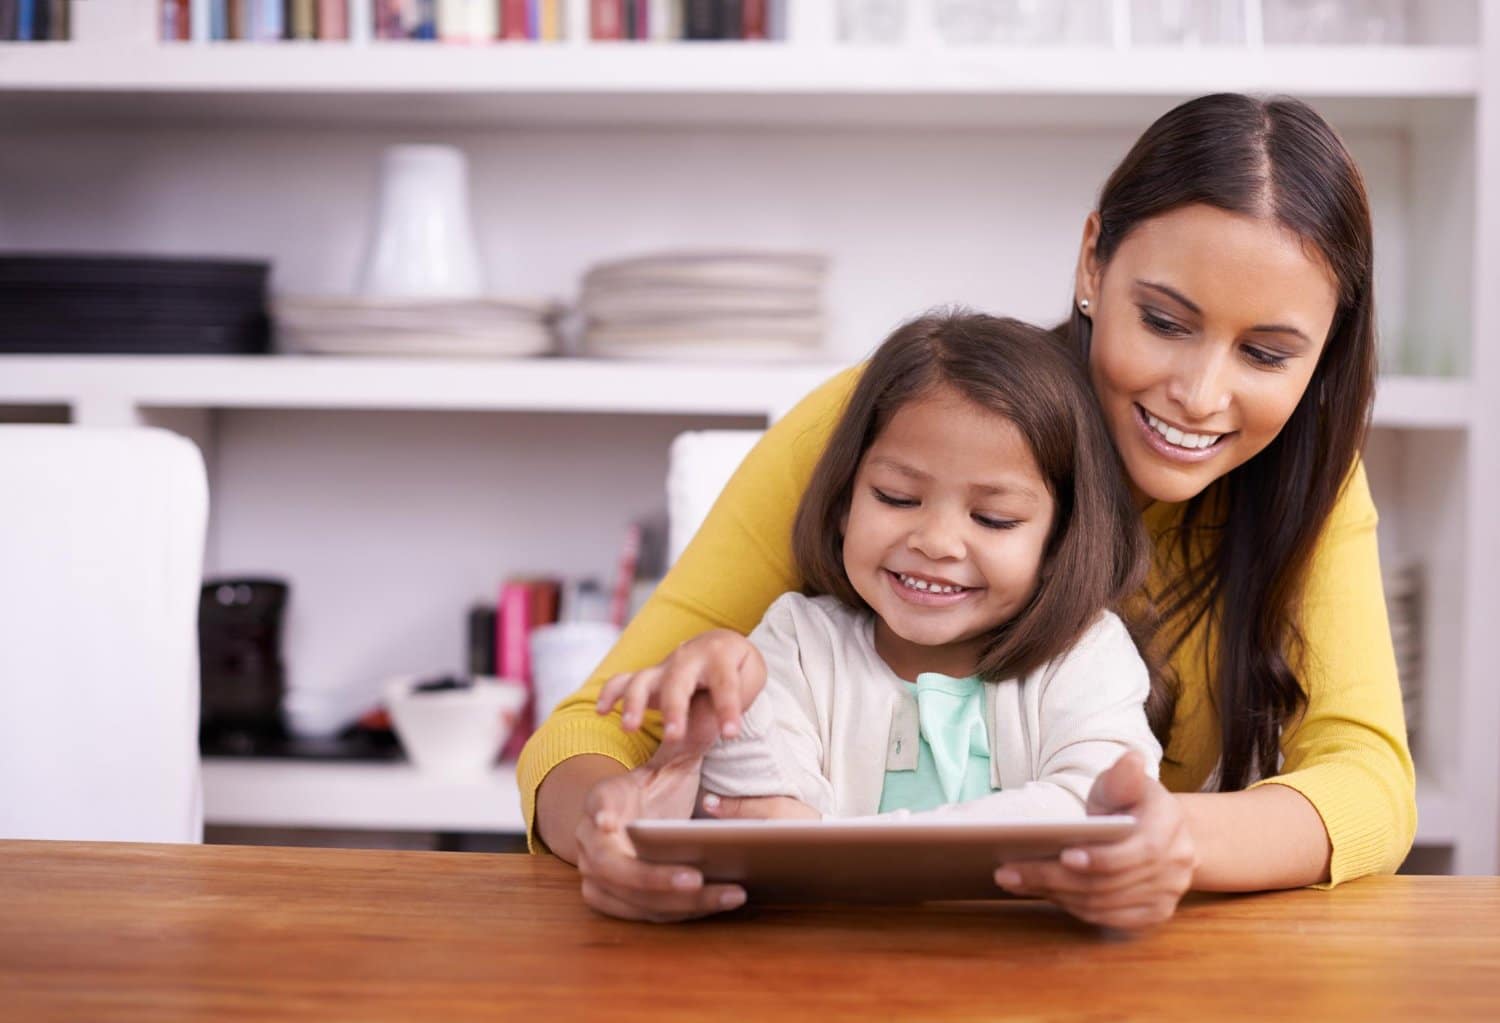 You are currently viewing Tips for Child-Friendly Tablet Usage